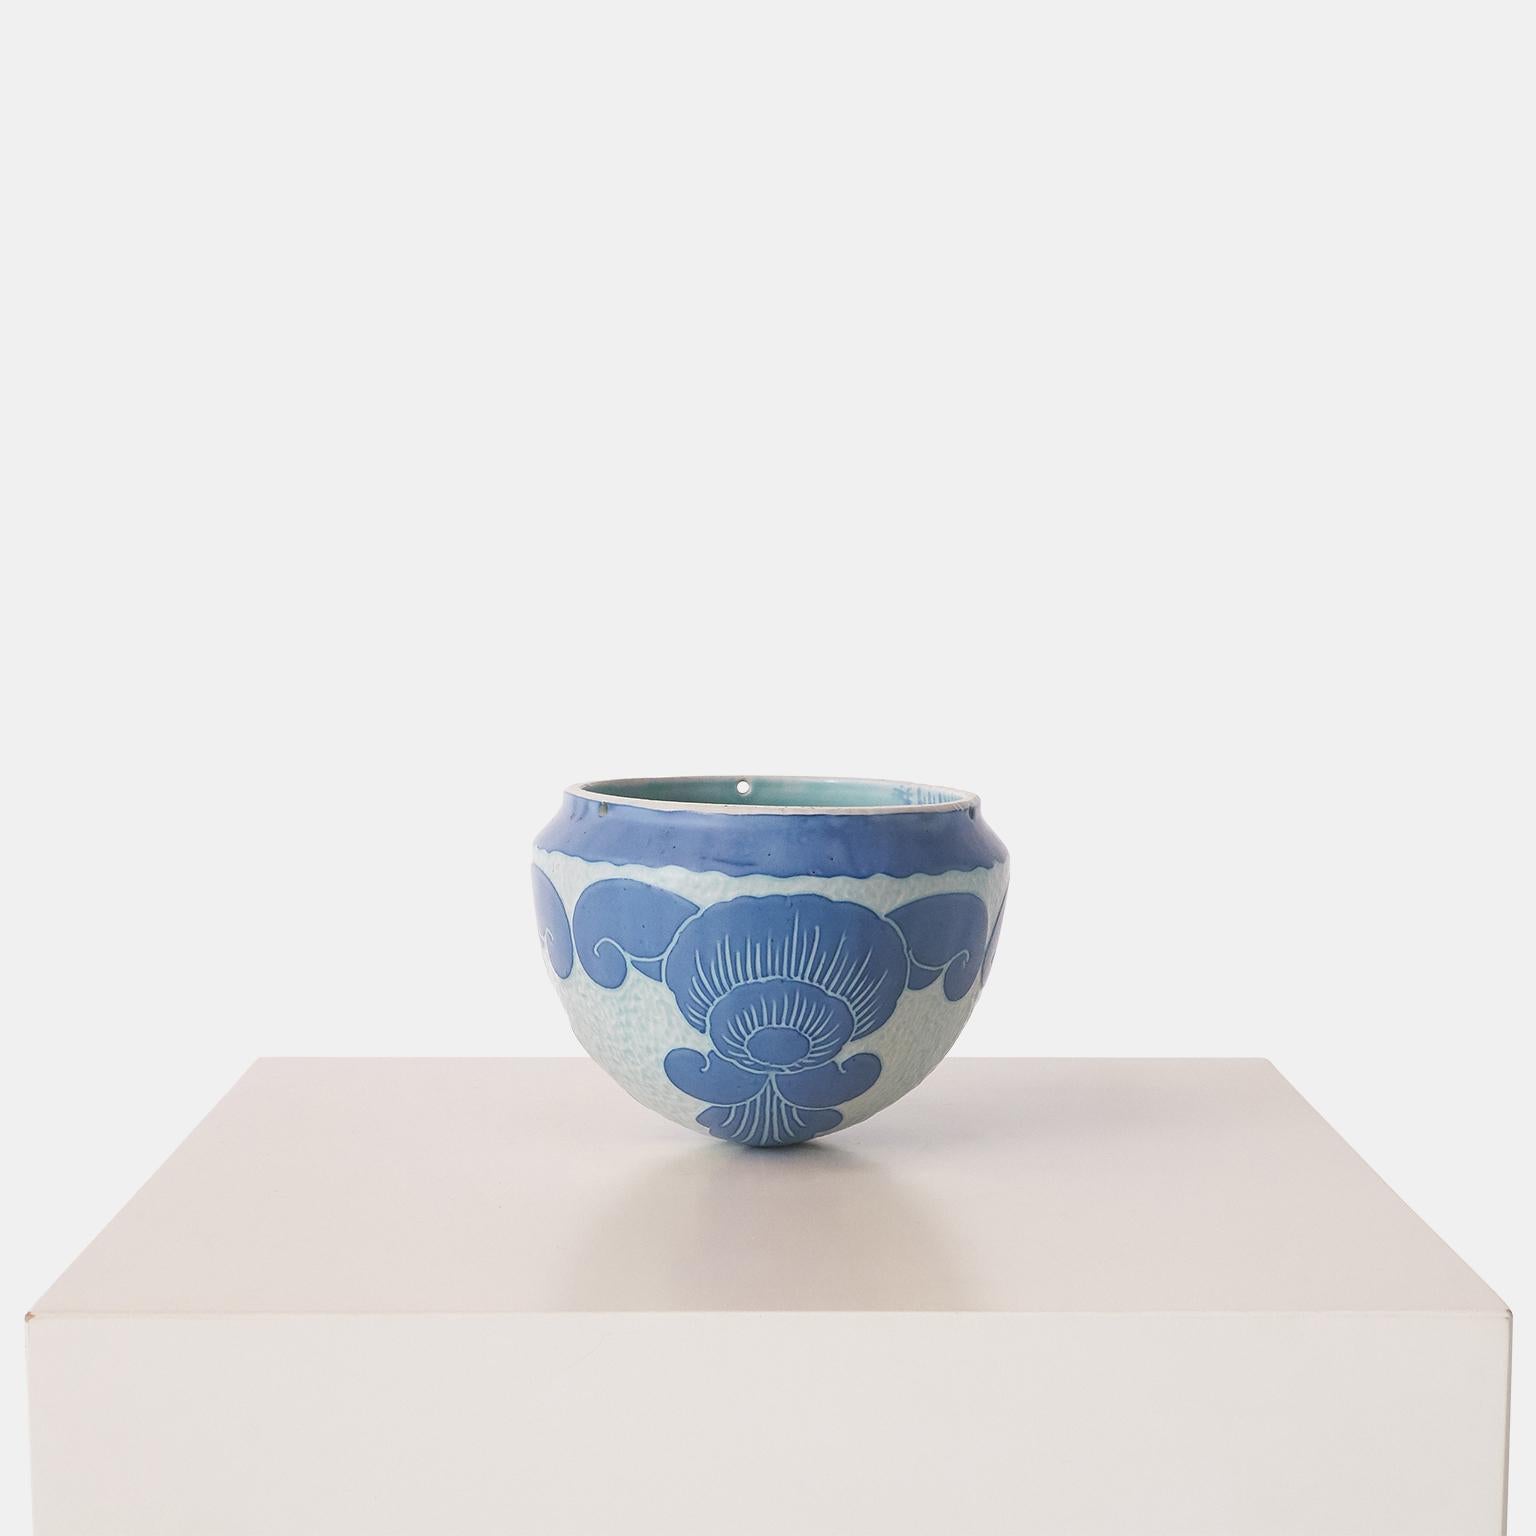 A handmade blue vase by Josef Ekberg for Gustavsberg. Each piece is unique and decorated with the Sgrafitto technique that was developed by Ekberg himself. This piece has 3 small holes in the upper rim and is designed to be used as a vessel for